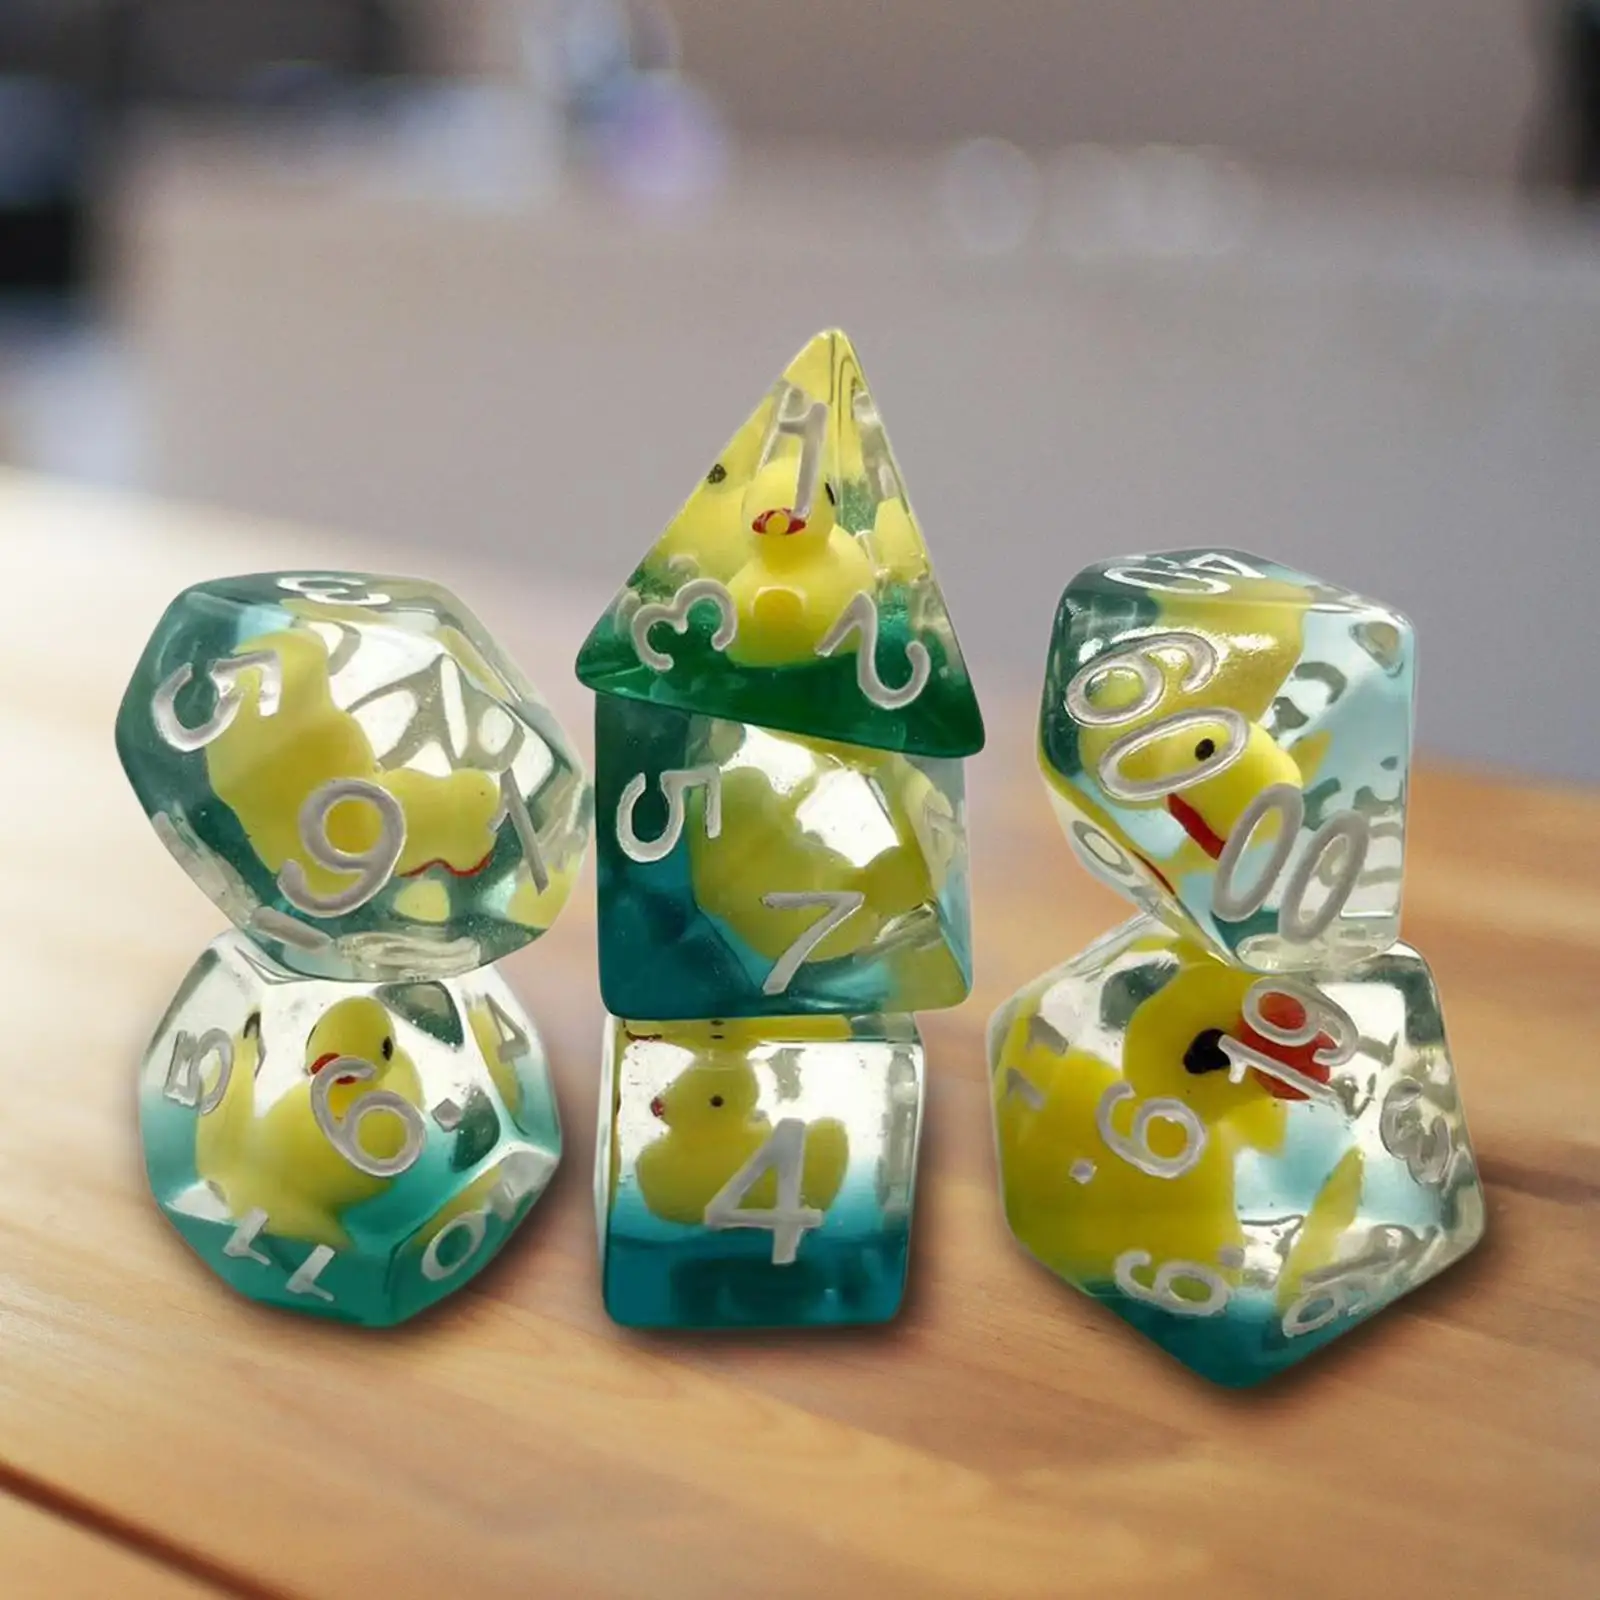 7x Multi Sided Polyhedral Dices Set Entertainment Toys D4-D20 Filled with Ducks for RPG Math Teaching Role Playing Board Game